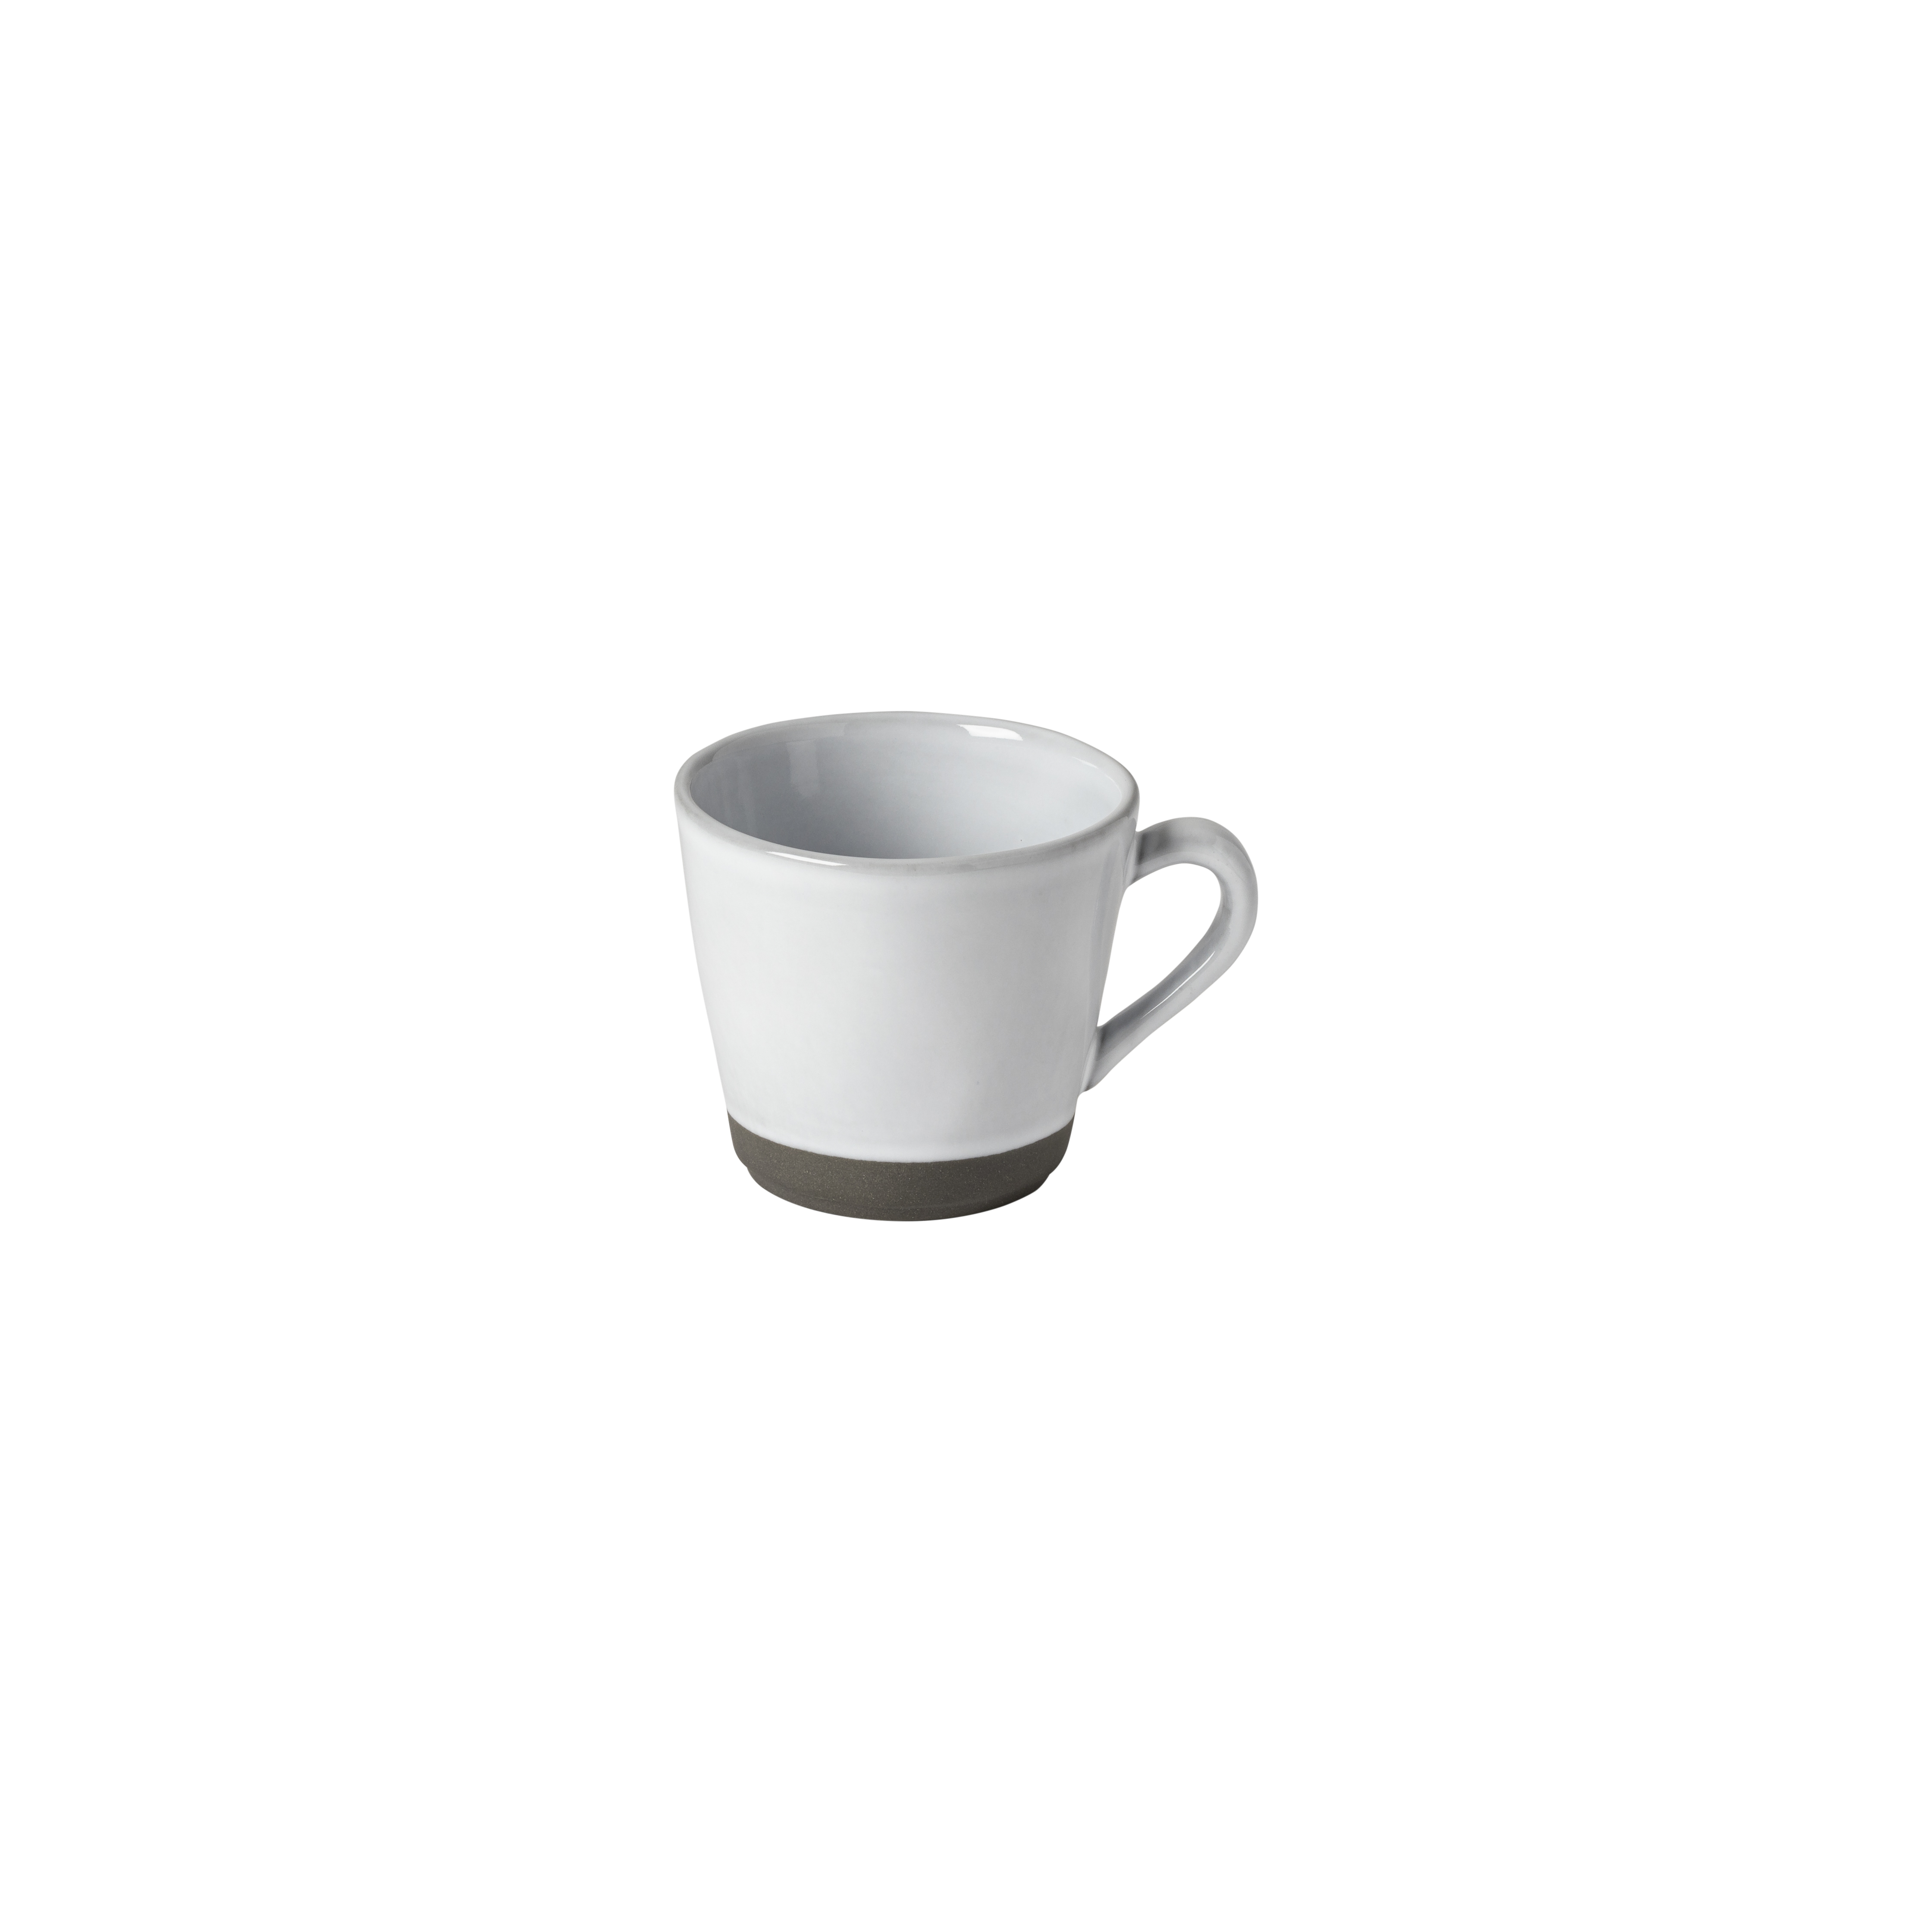 Plano White Tea Cup 21cl Gift